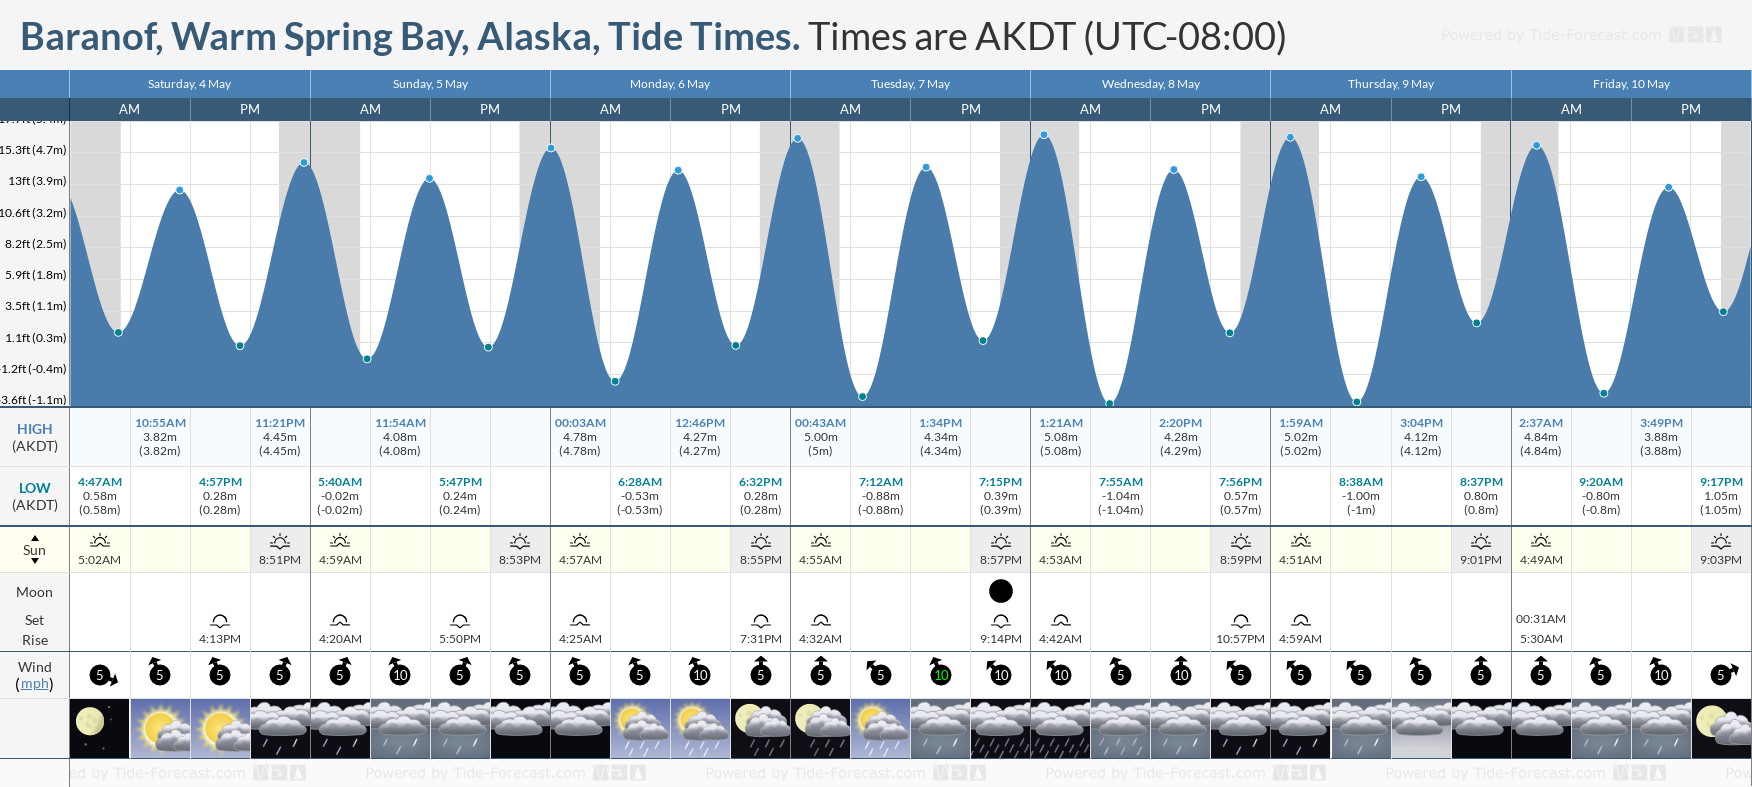 Baranof, Warm Spring Bay, Alaska Tide Chart including high and low tide tide times for the next 7 days